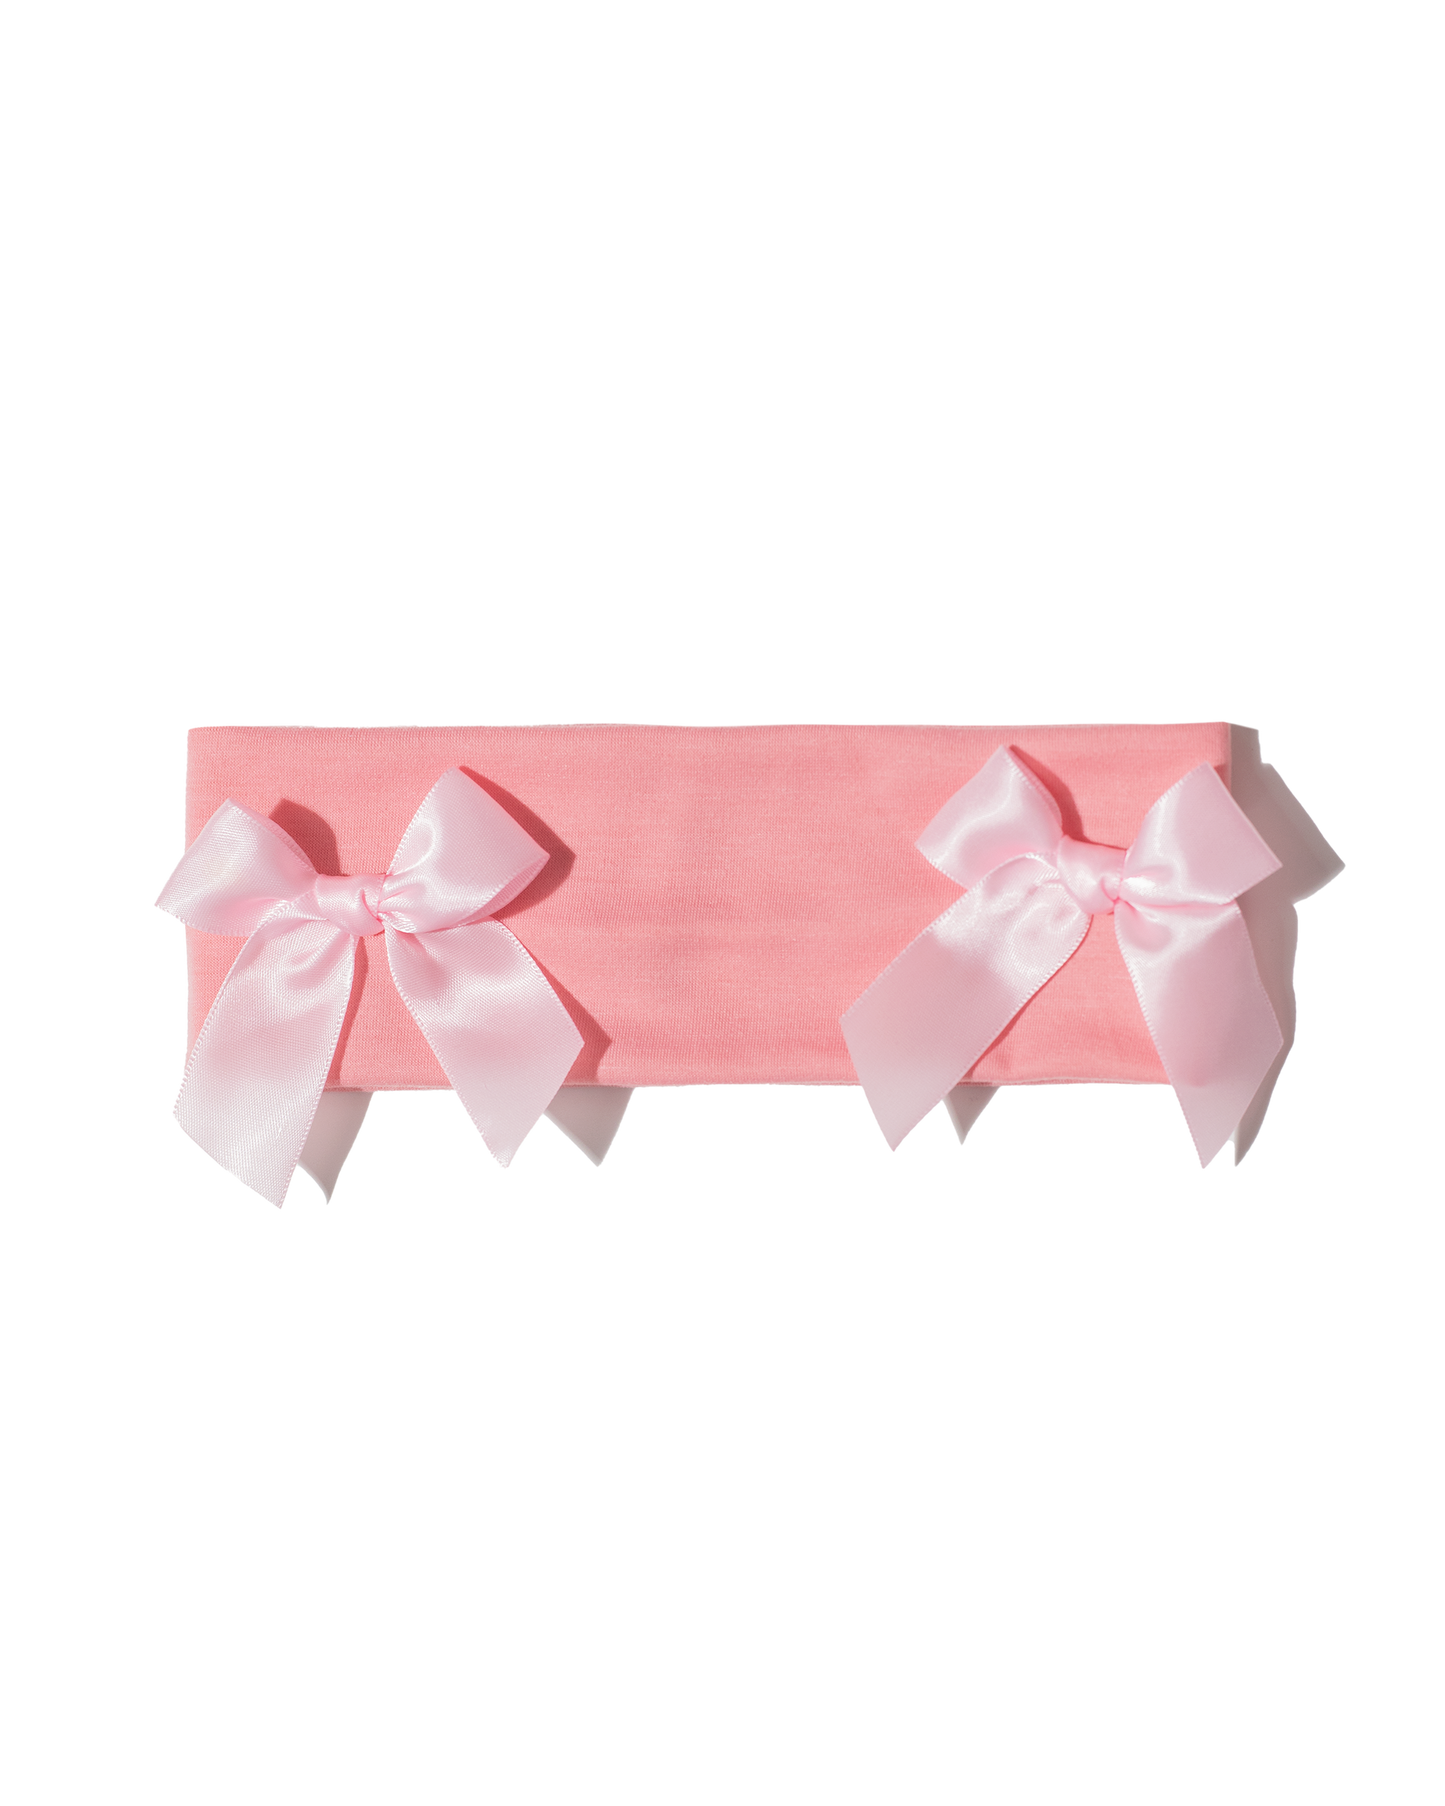 pink headband with two pink bows on both side | Bow Me a Kiss | Baobei Label | Headband | Buttermilk Accessories